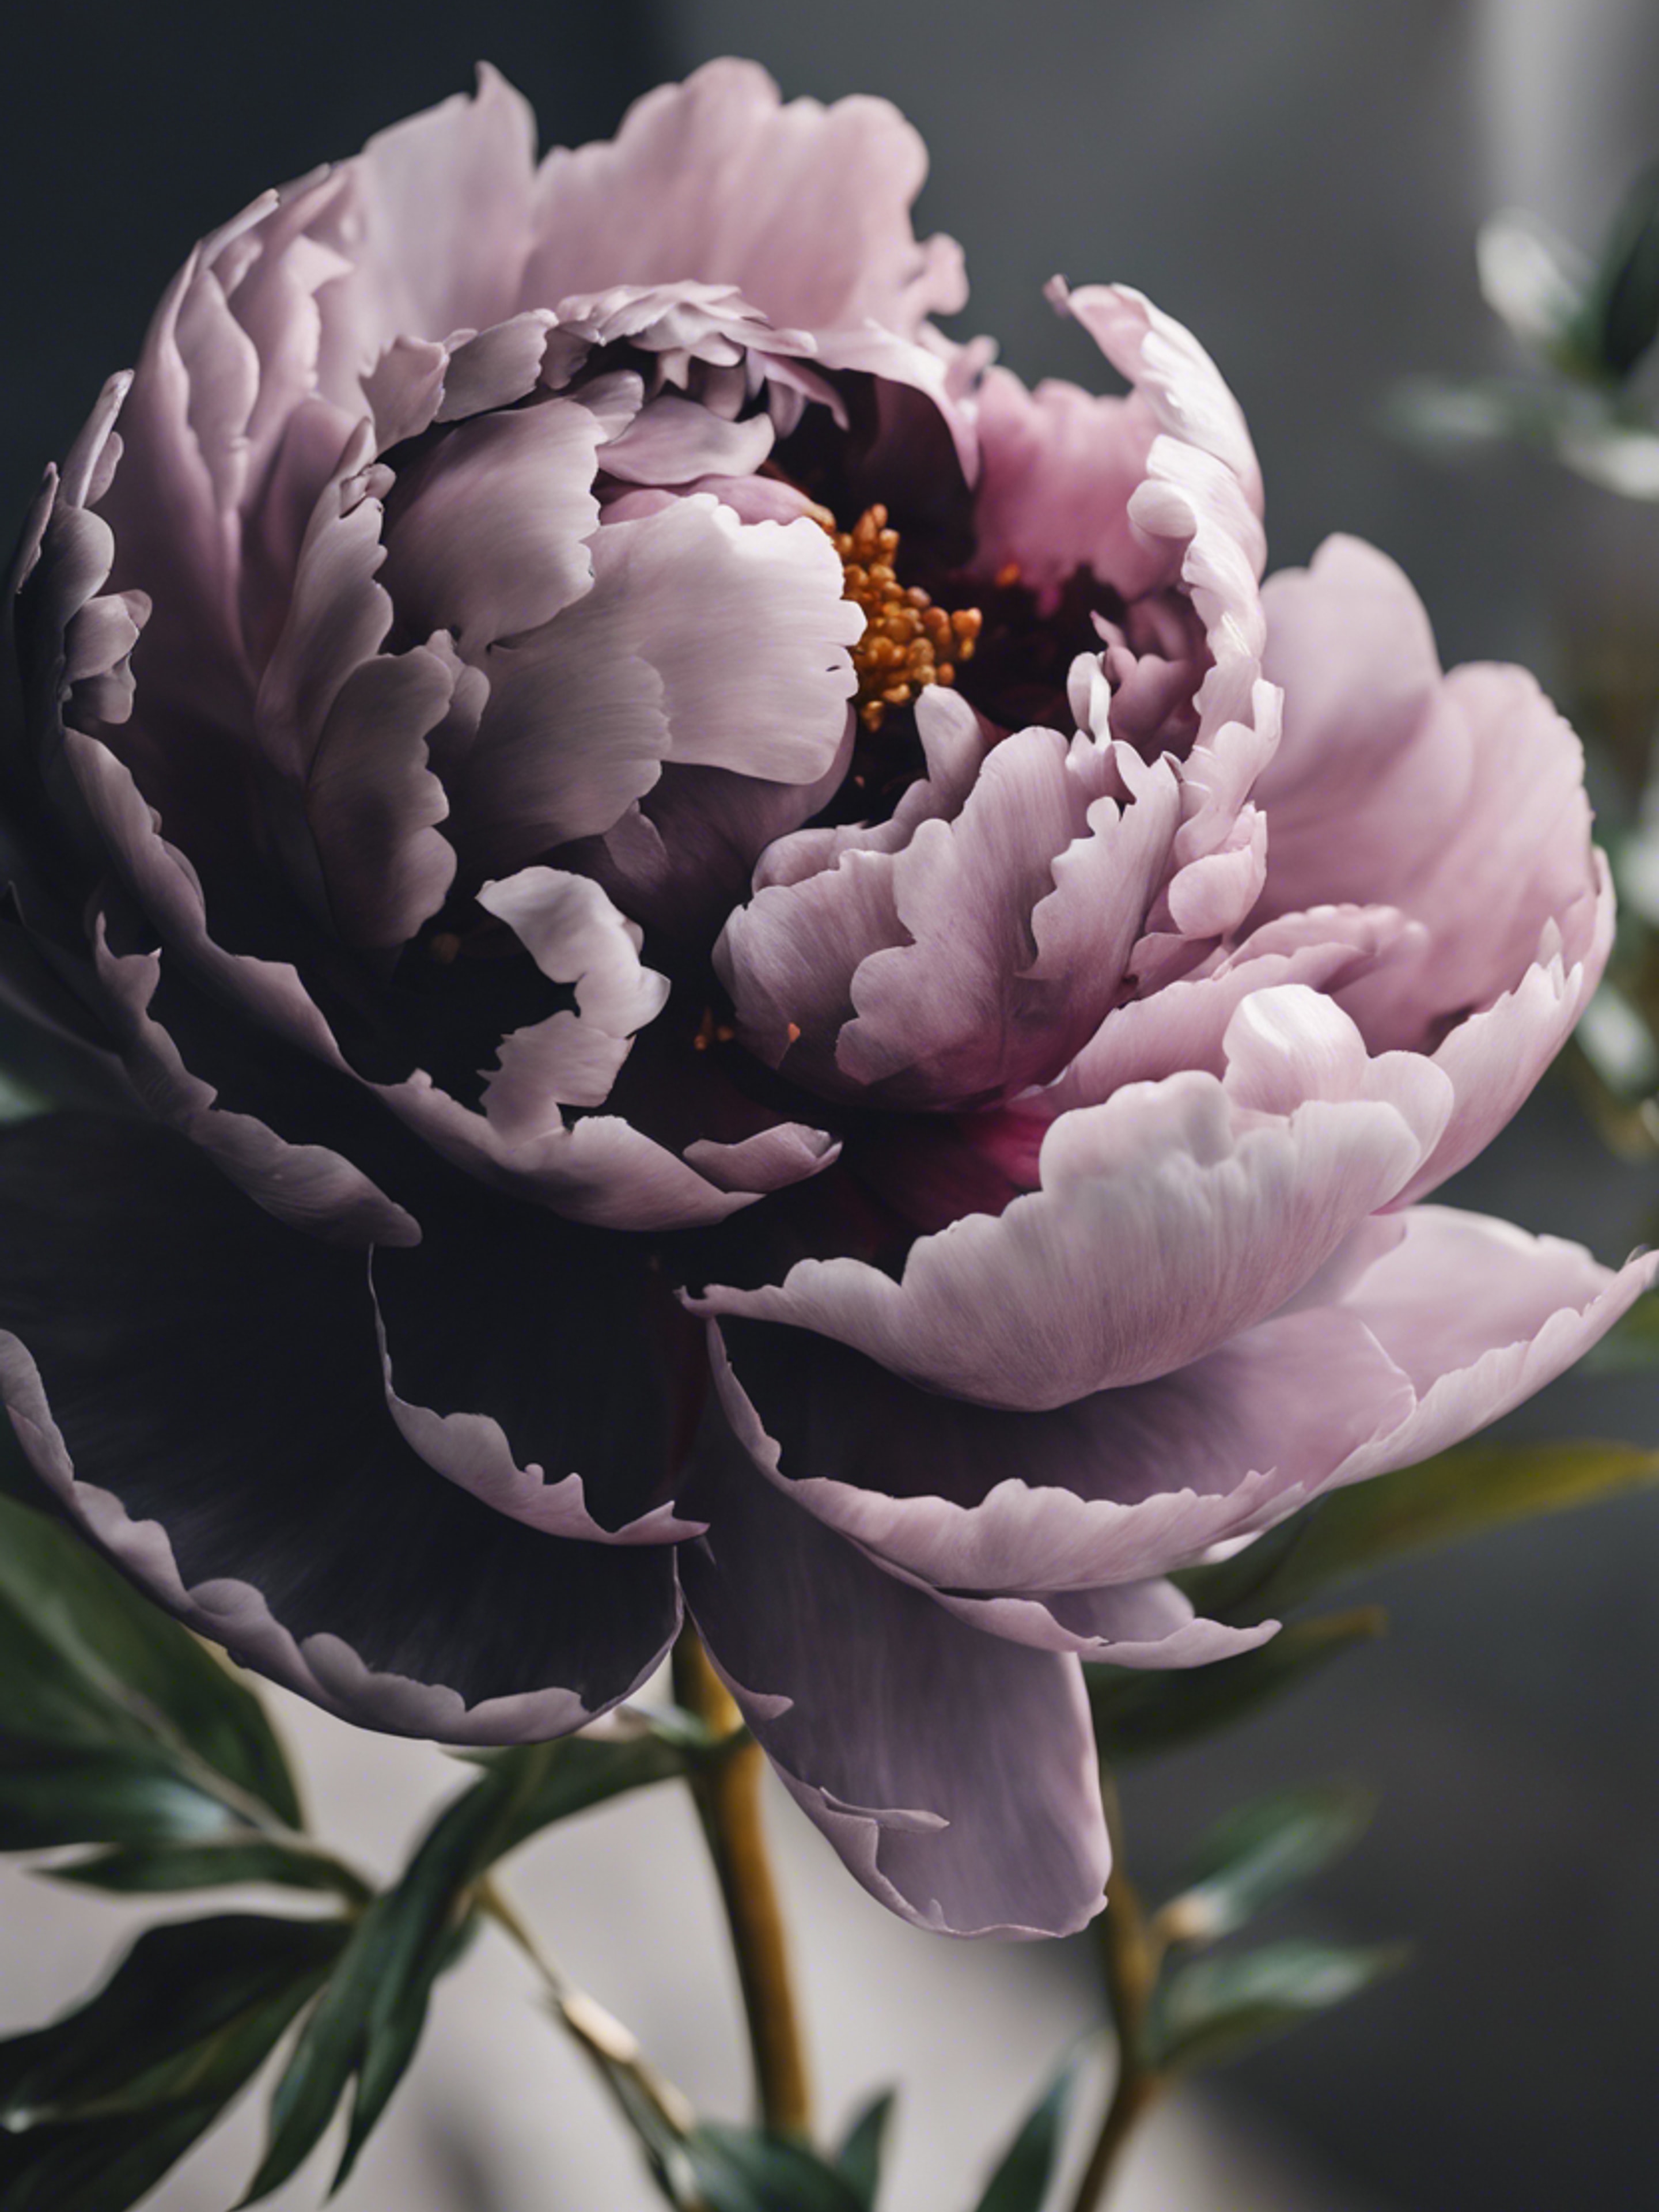 A black peony, the symbol of prosperity and honor, complementing a traditional Asian painting. Tapeta[2c78f74174874eadaf7e]